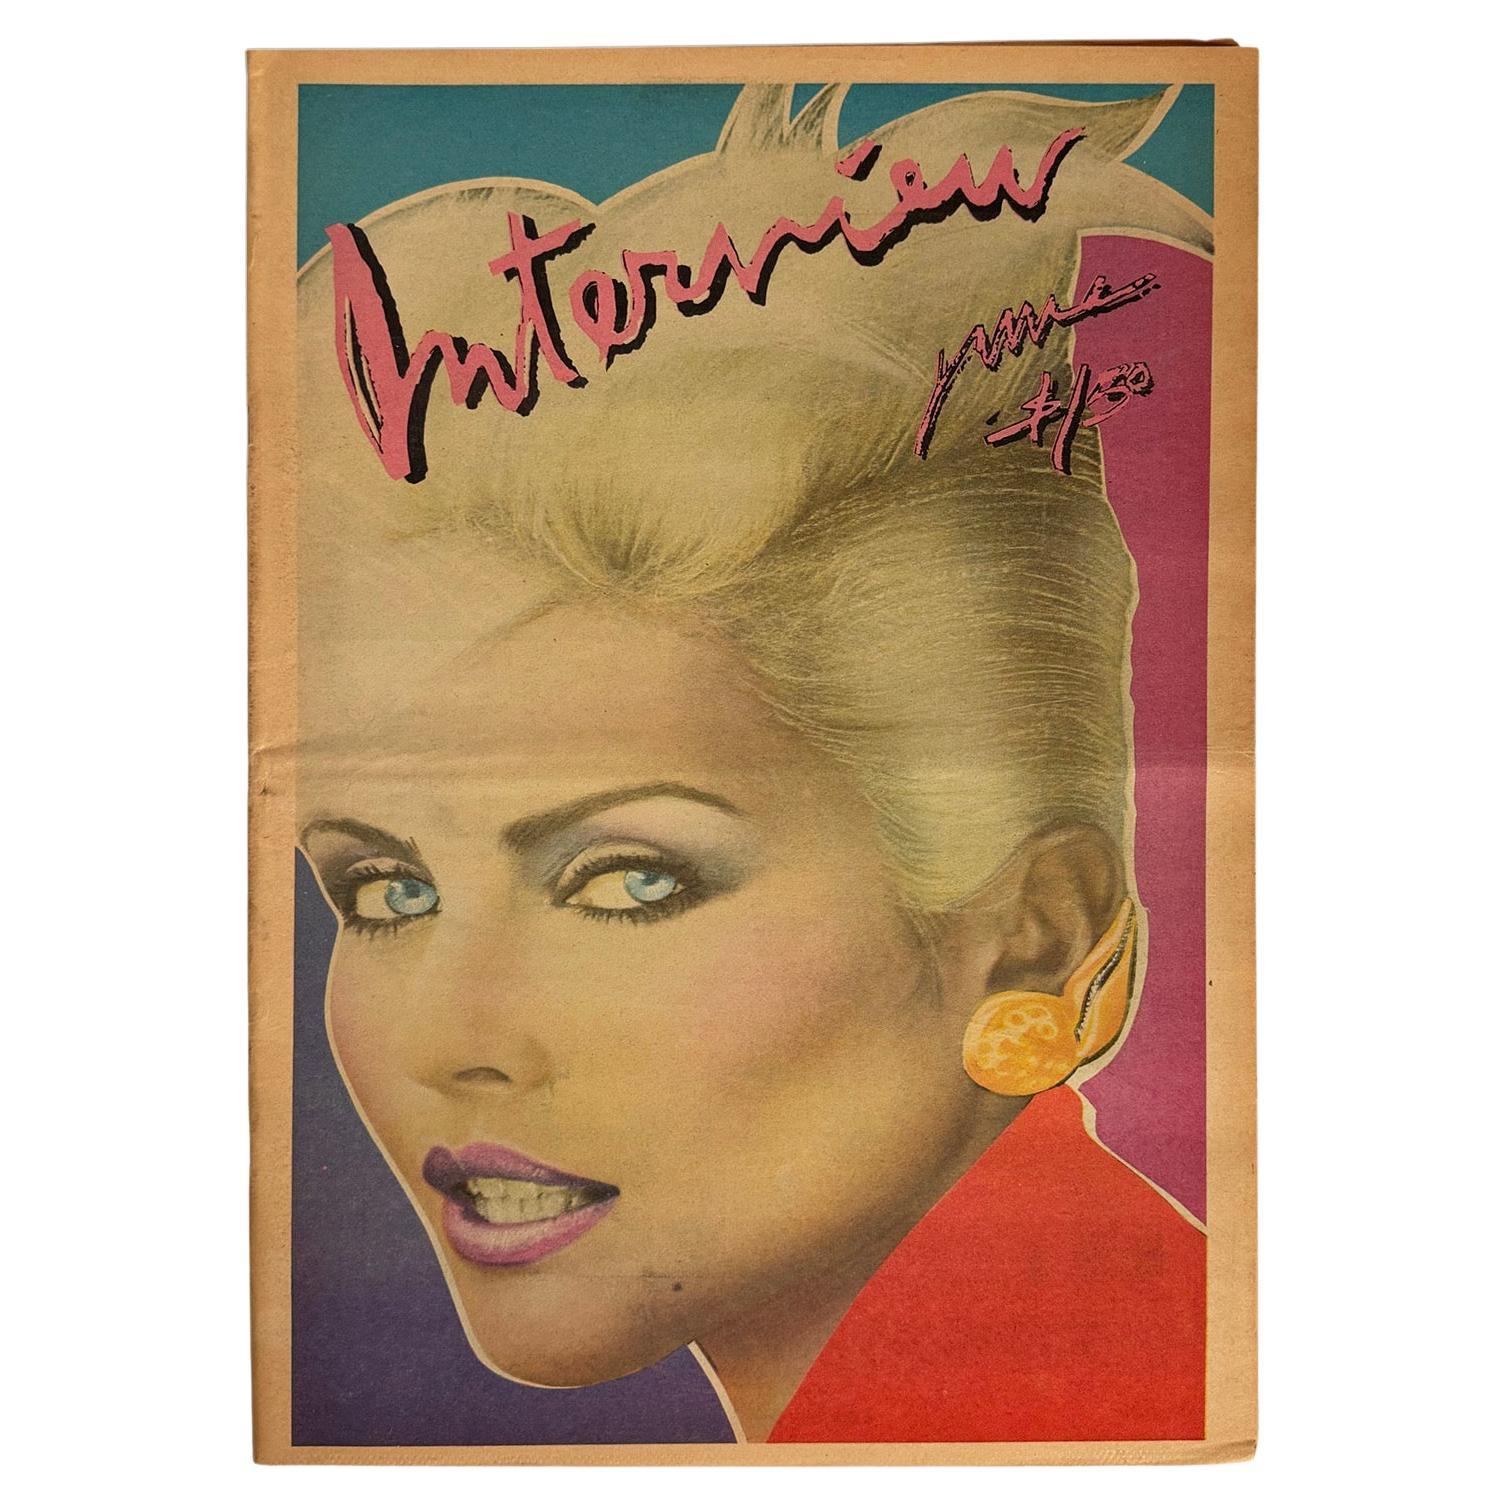 Vintage original 1979 Andy Warhol Interview magazine featuring a standout Debbie Harry cover.

The full edition 1979. Newspaper stock. Offset printed.
Measures: 11 x 17 inches.
Minor signs of handling; otherwise very good vintage condition.
Unsigned